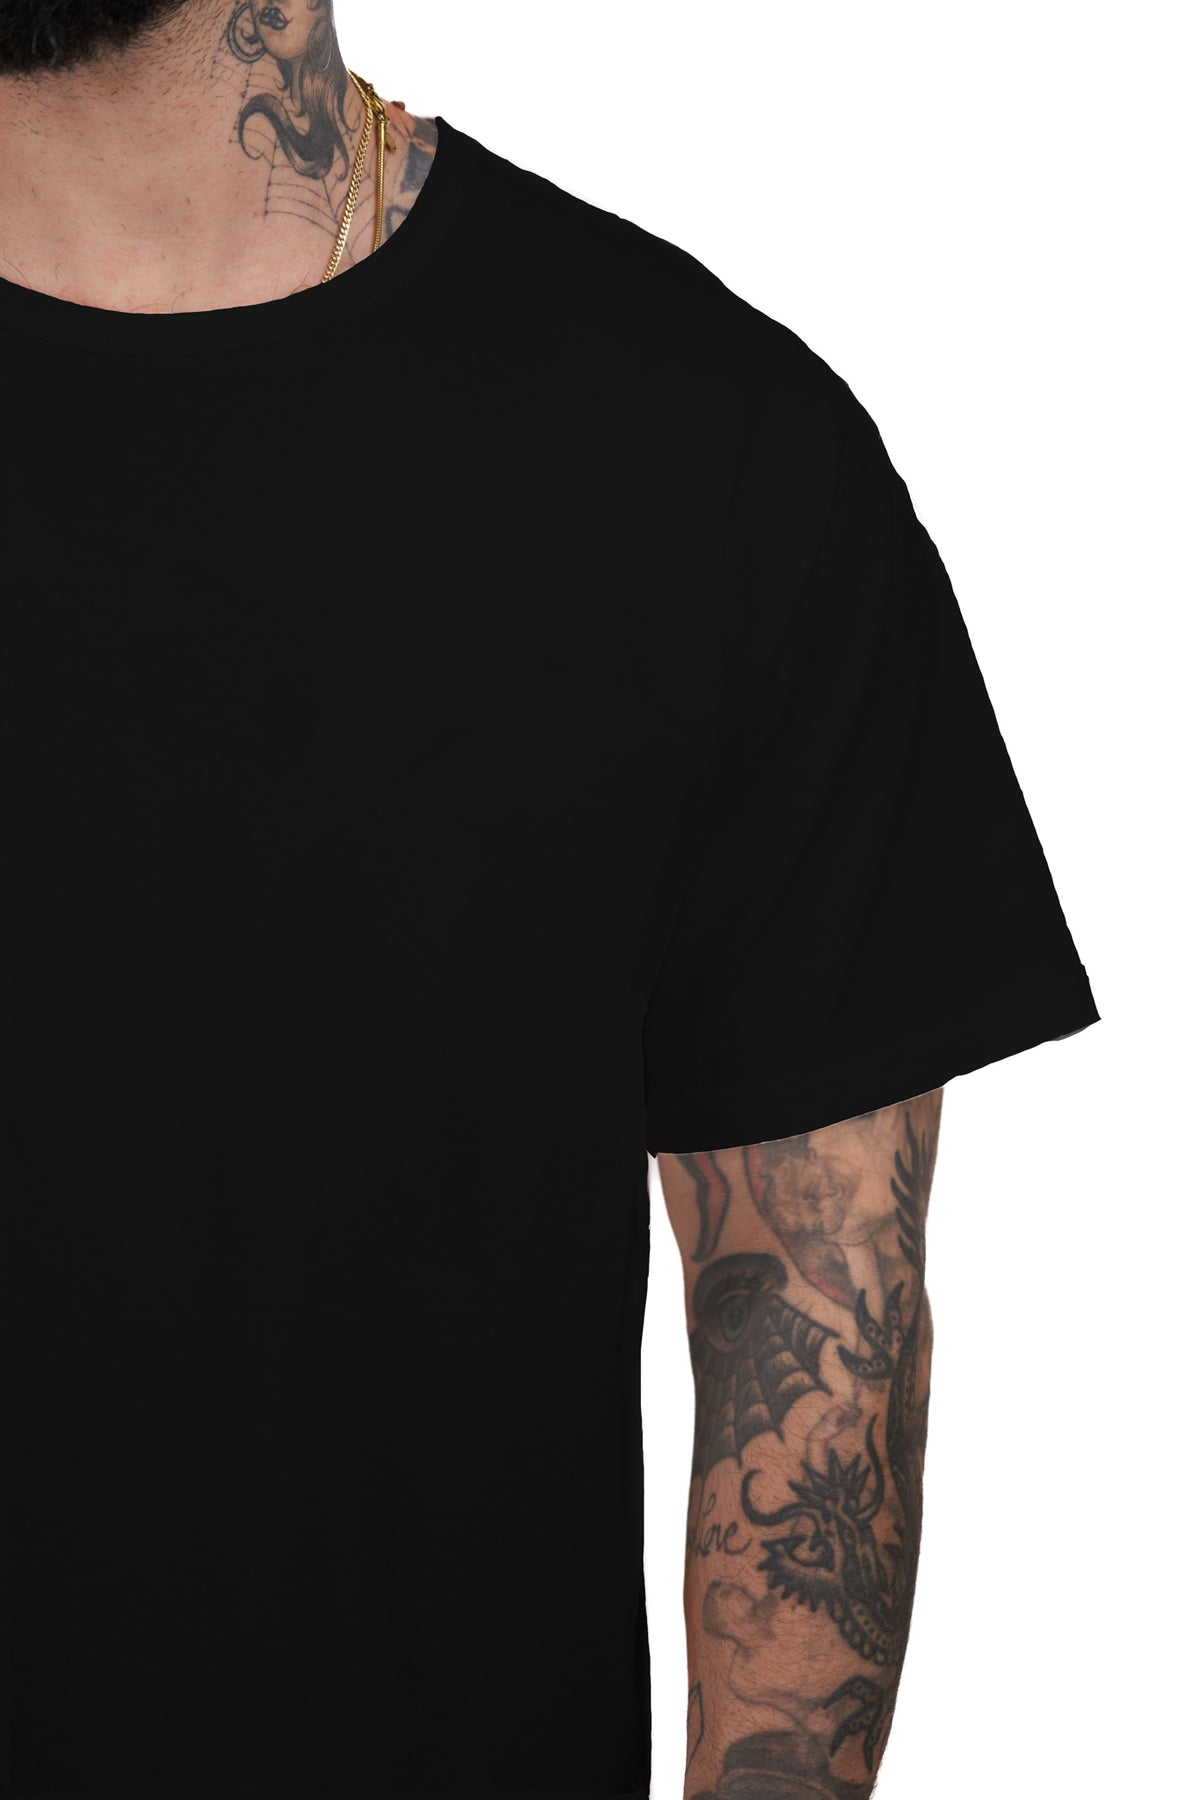 The 50/50 Shirt - CLASSIC TEE - Piece Dyed Black